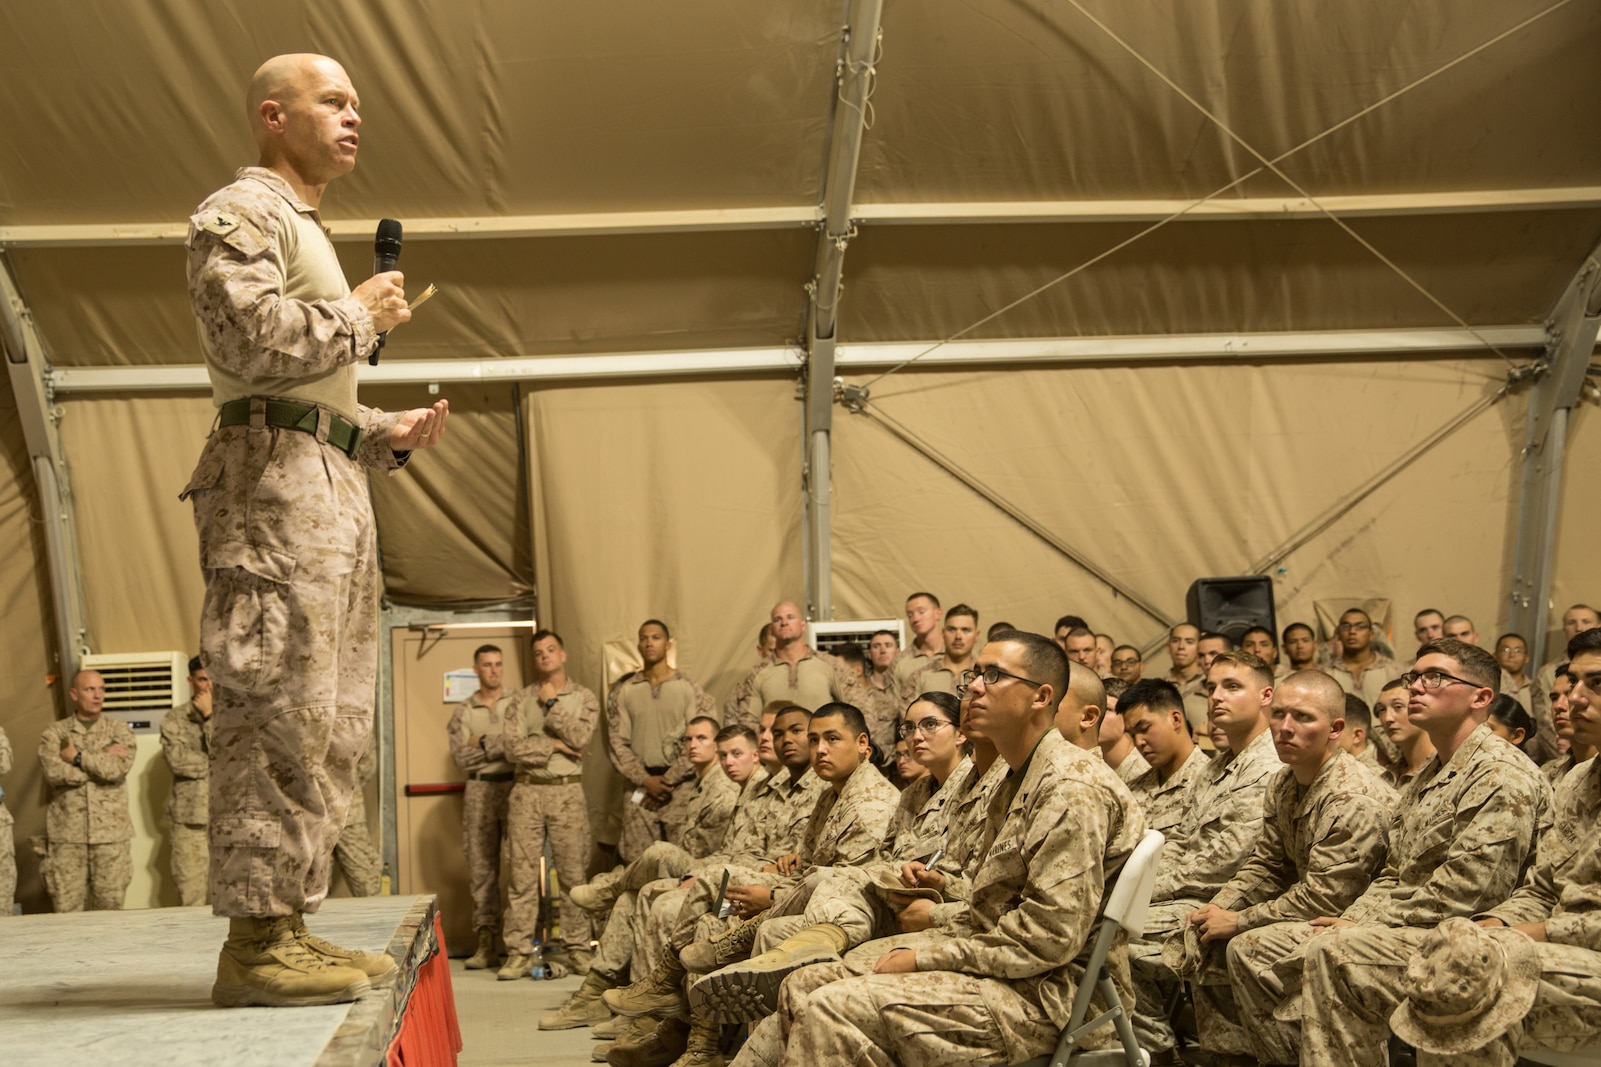 UNDISCLOSED LOCATION, SOUTHWEST ASIA - U.S. Marine Corps Col. George Schreffler, the commanding officer of Special Purpose Marine Air-Ground Task Force, Crisis Response-Central Command, speaks to Marines and Sailors during a town hall meeting October 19, 2018. During the town hall, the SPMAGTF-CR-CC Commanding Officer and Sergeant Major briefed Marines on operations in the region. (U.S. Marine Corps photo by Cpl. Teagan Fredericks)